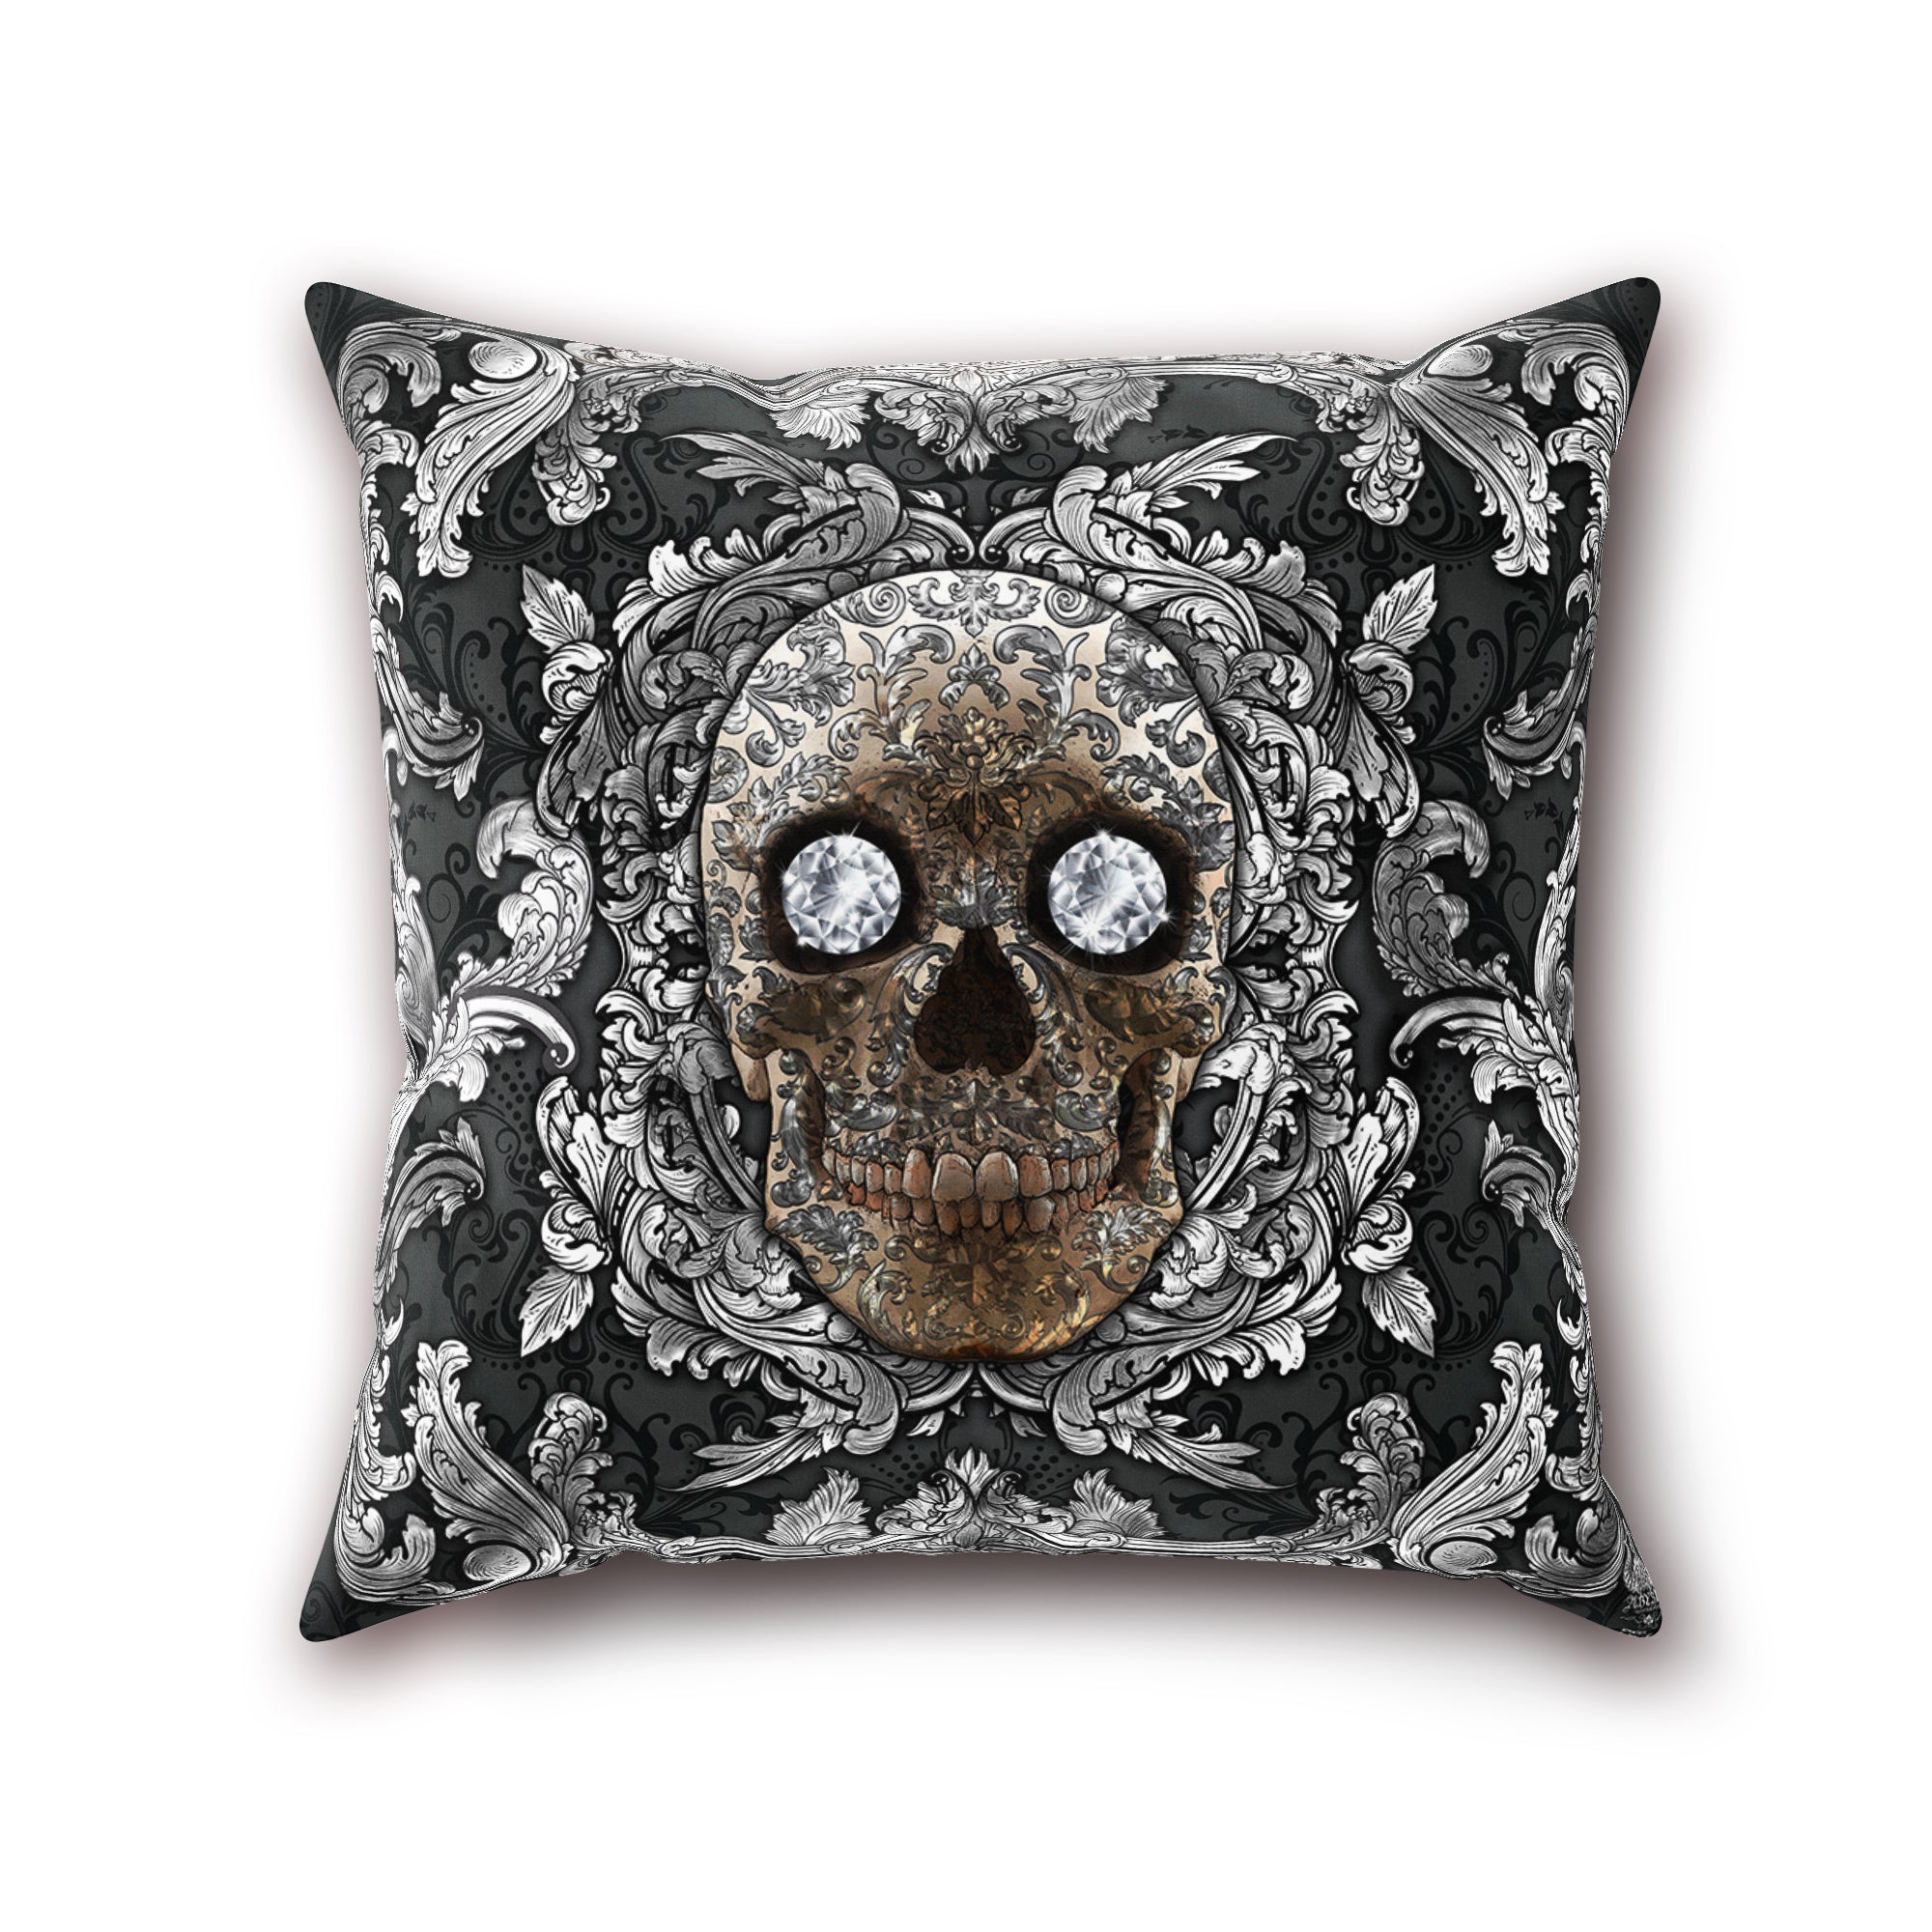 Silver Skull Throw Pillow, Decorative Accent Pillow, Square Cushion Cover, Vintage, Baroque Decor, Macabre Art, Eclectic Home Decor - Red and Black, 2 Colors - Abysm Internal